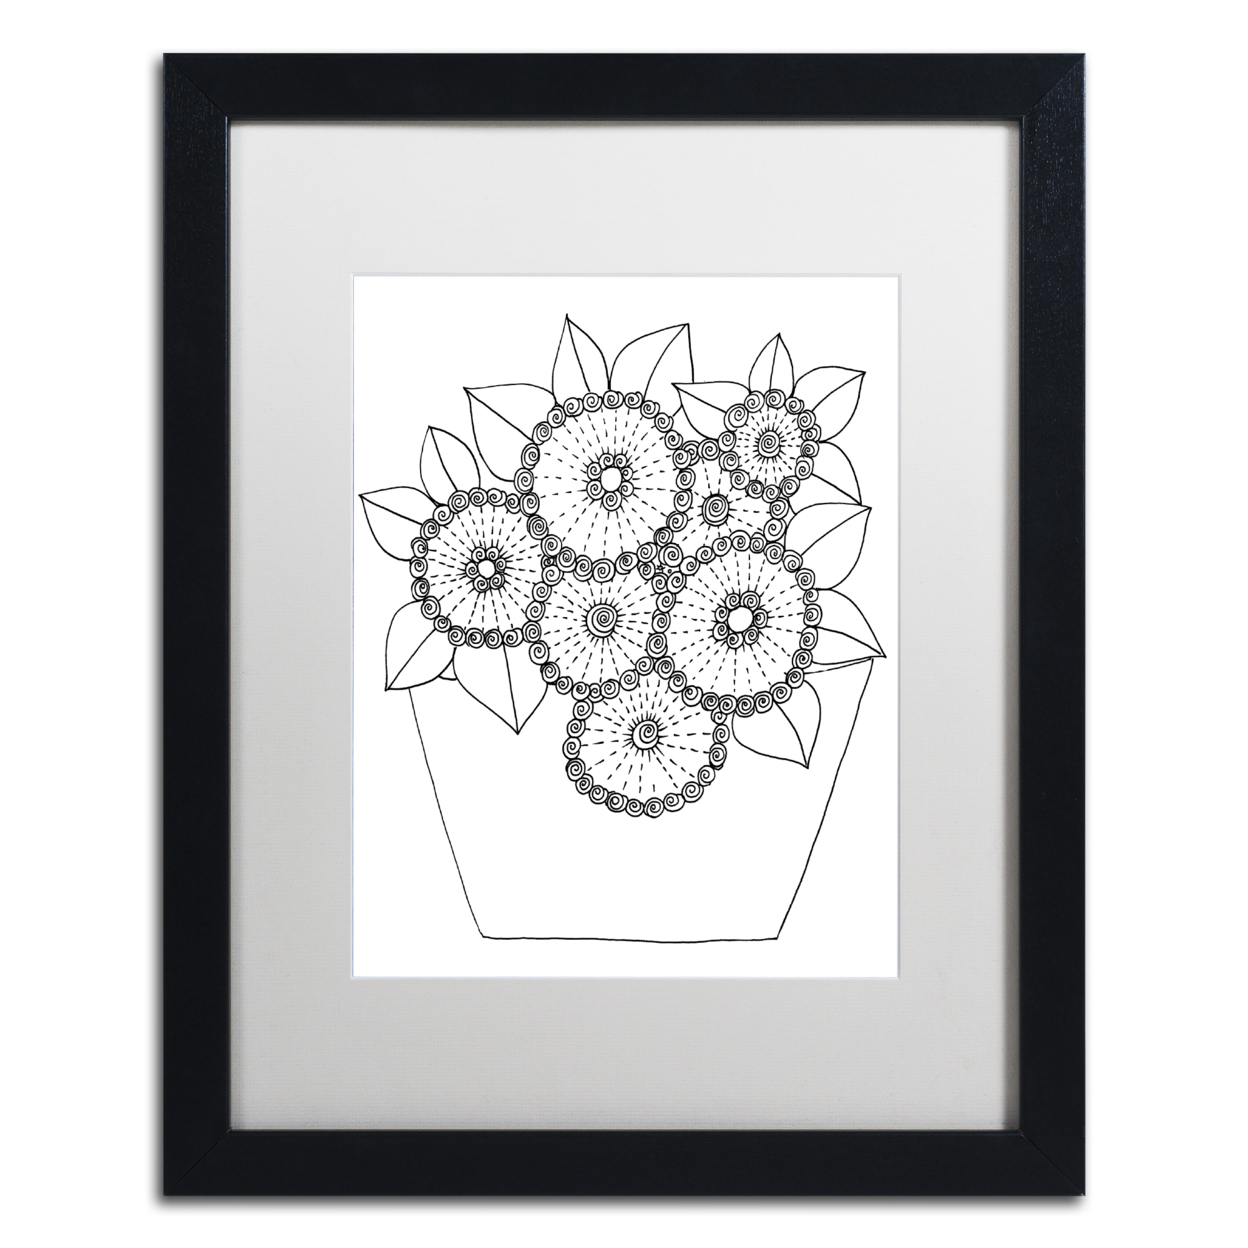 KCDoodleArt 'Flowers In A Pot' Black Wooden Framed Art 18 X 22 Inches